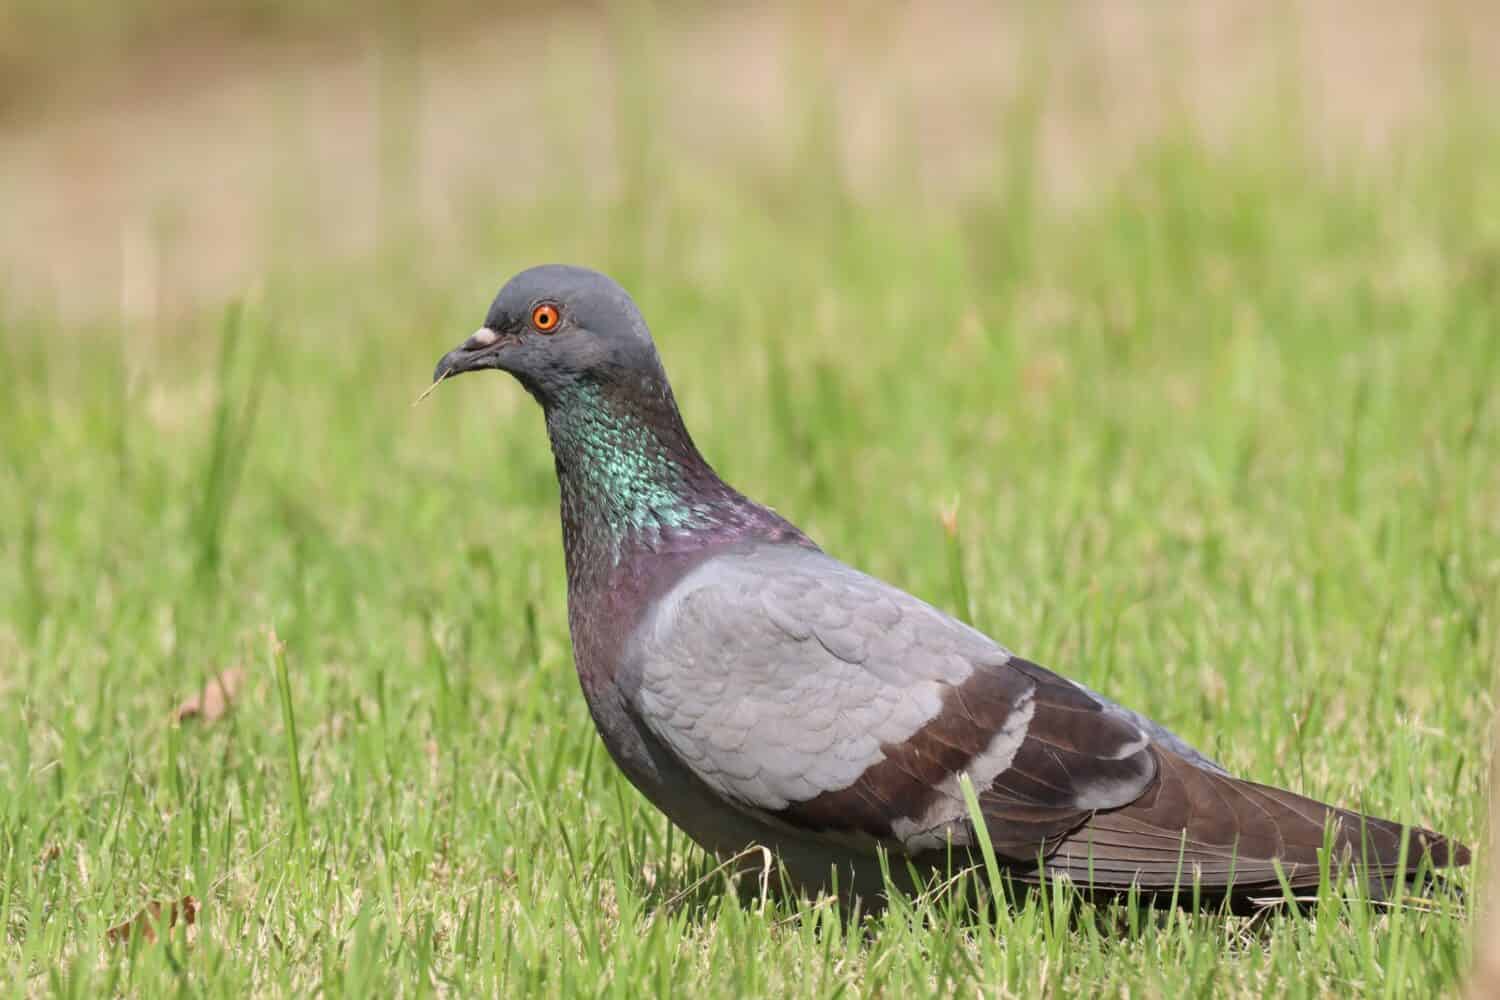 Rock dove or Rock pigeon (Columba livia) walking in grass field, holds dry branches in its beak to build a nest